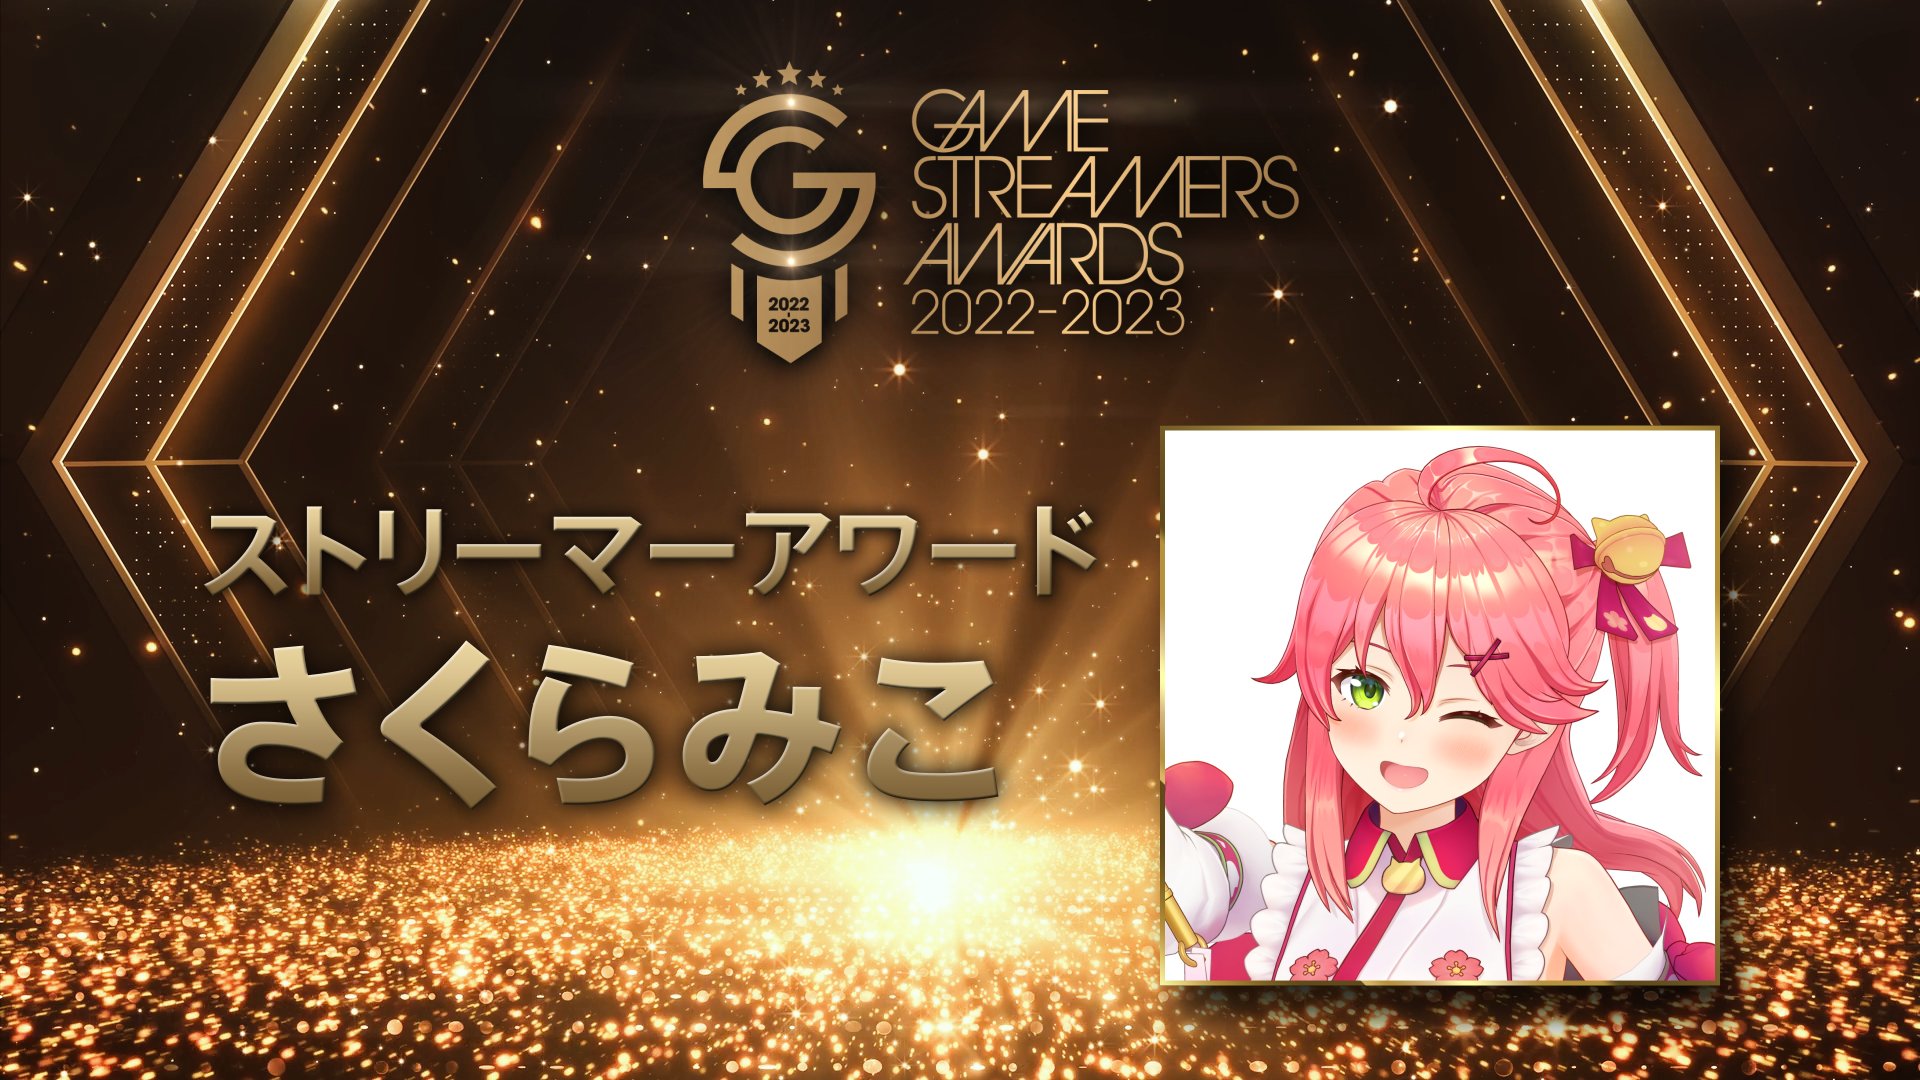 GAME STREAMERS AWARDS(2022-2023)を受賞